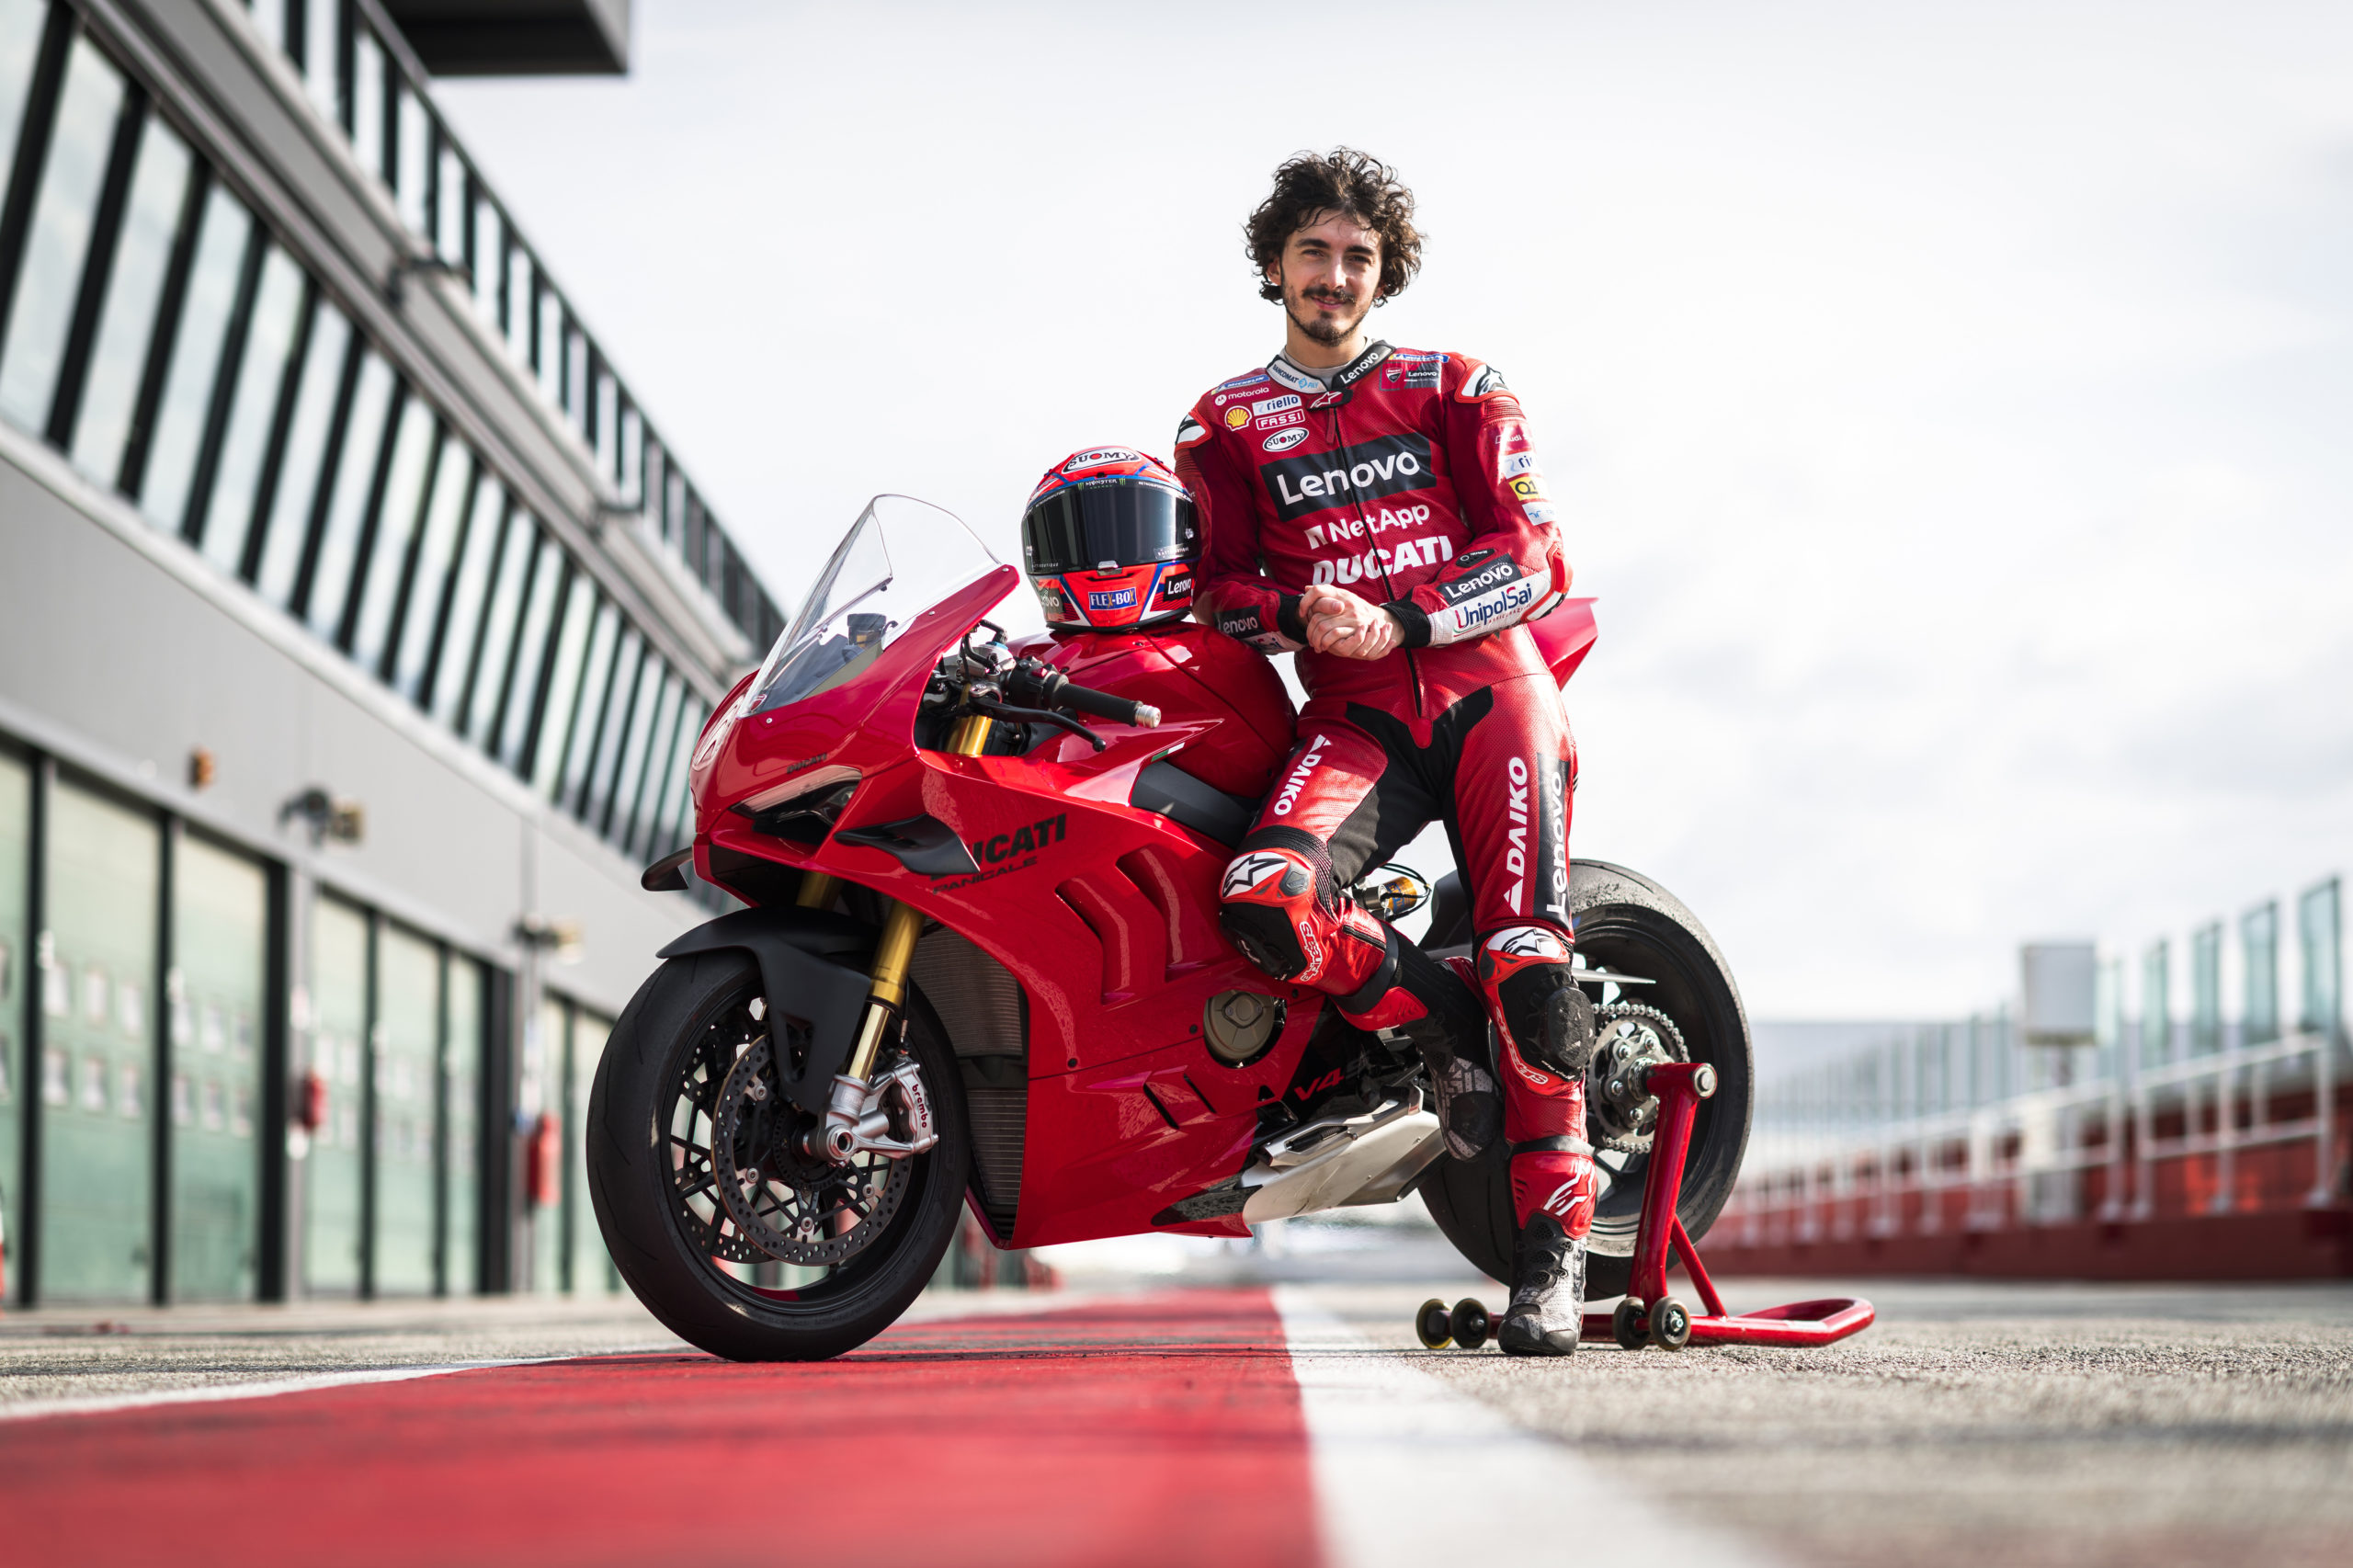 Ducati's new 2022 Panigale V4 and V4 S: race bike on the track with a rider ready to try the bike out